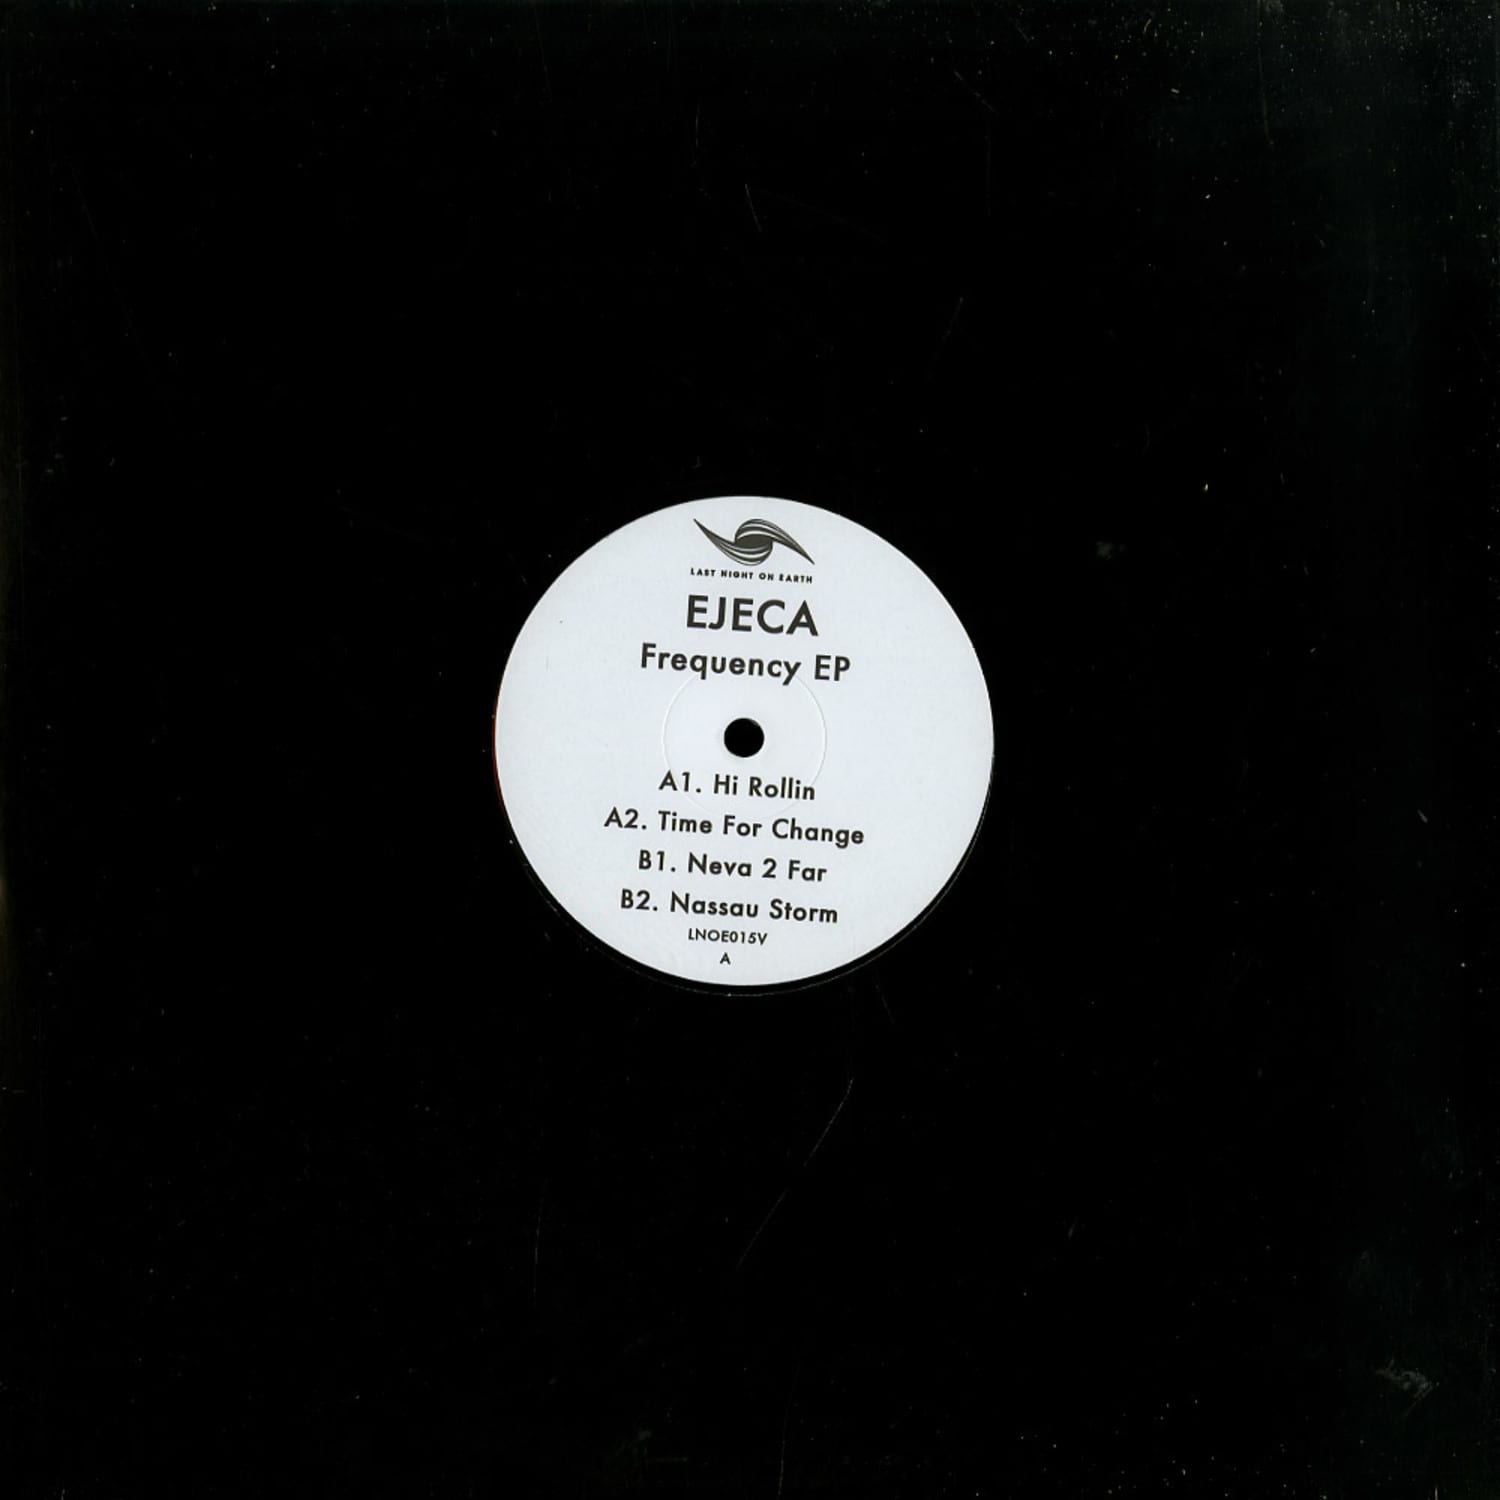 Ejeca - FREQUENCY EP